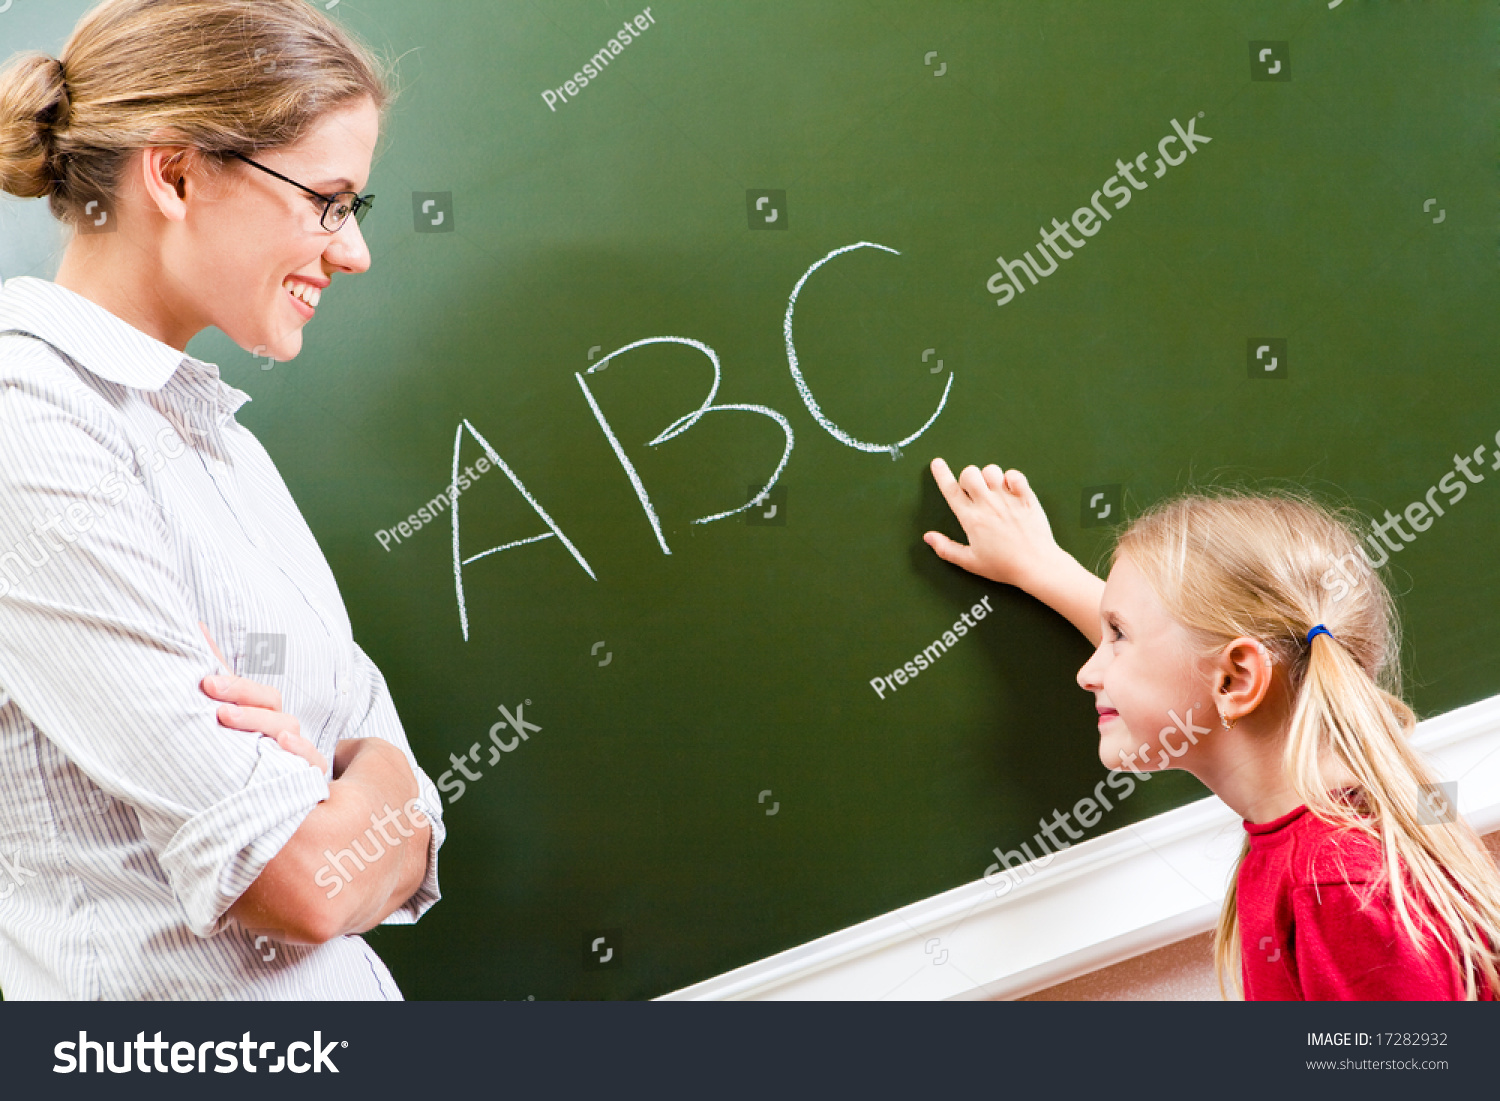 Image Of Smart Girl Pointing At Letter On Blackboard And Looking At Her ...